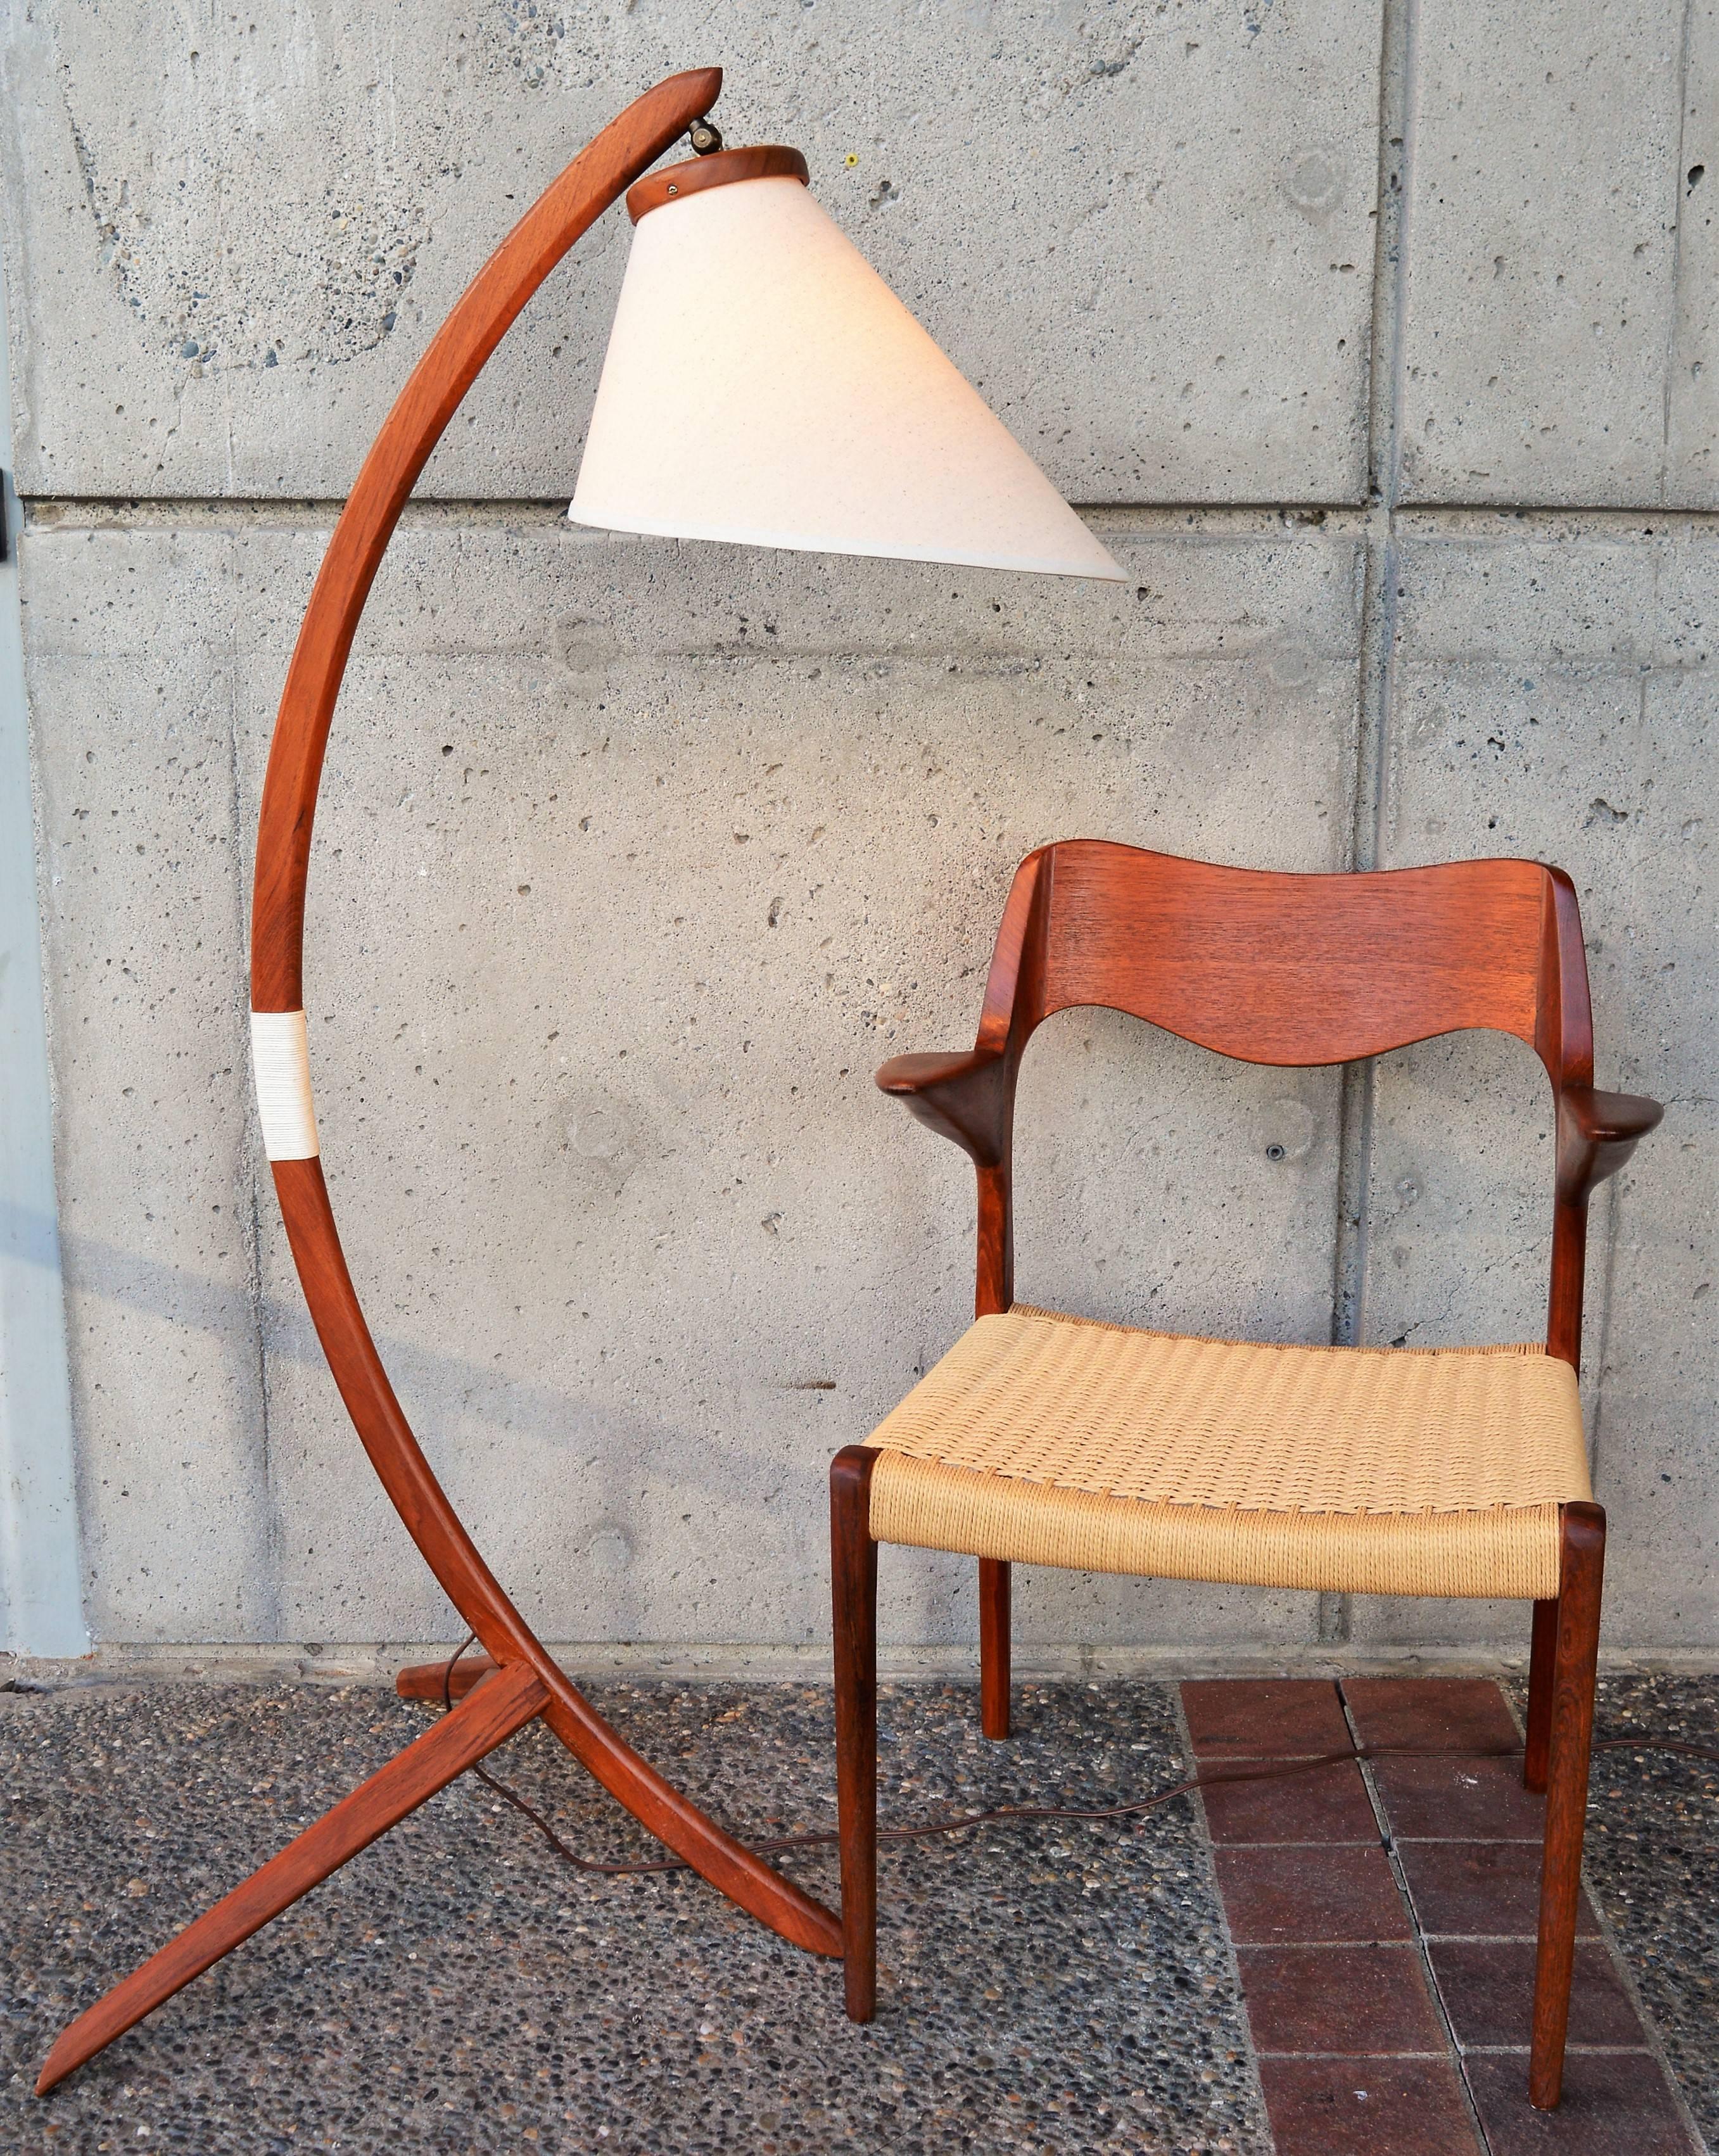 This iconic Danish modern teak floor lamp in the style of Rispal is so dramatic and a real scene stealer! In awesome condition and freshly oiled, the lamp is nick named the 